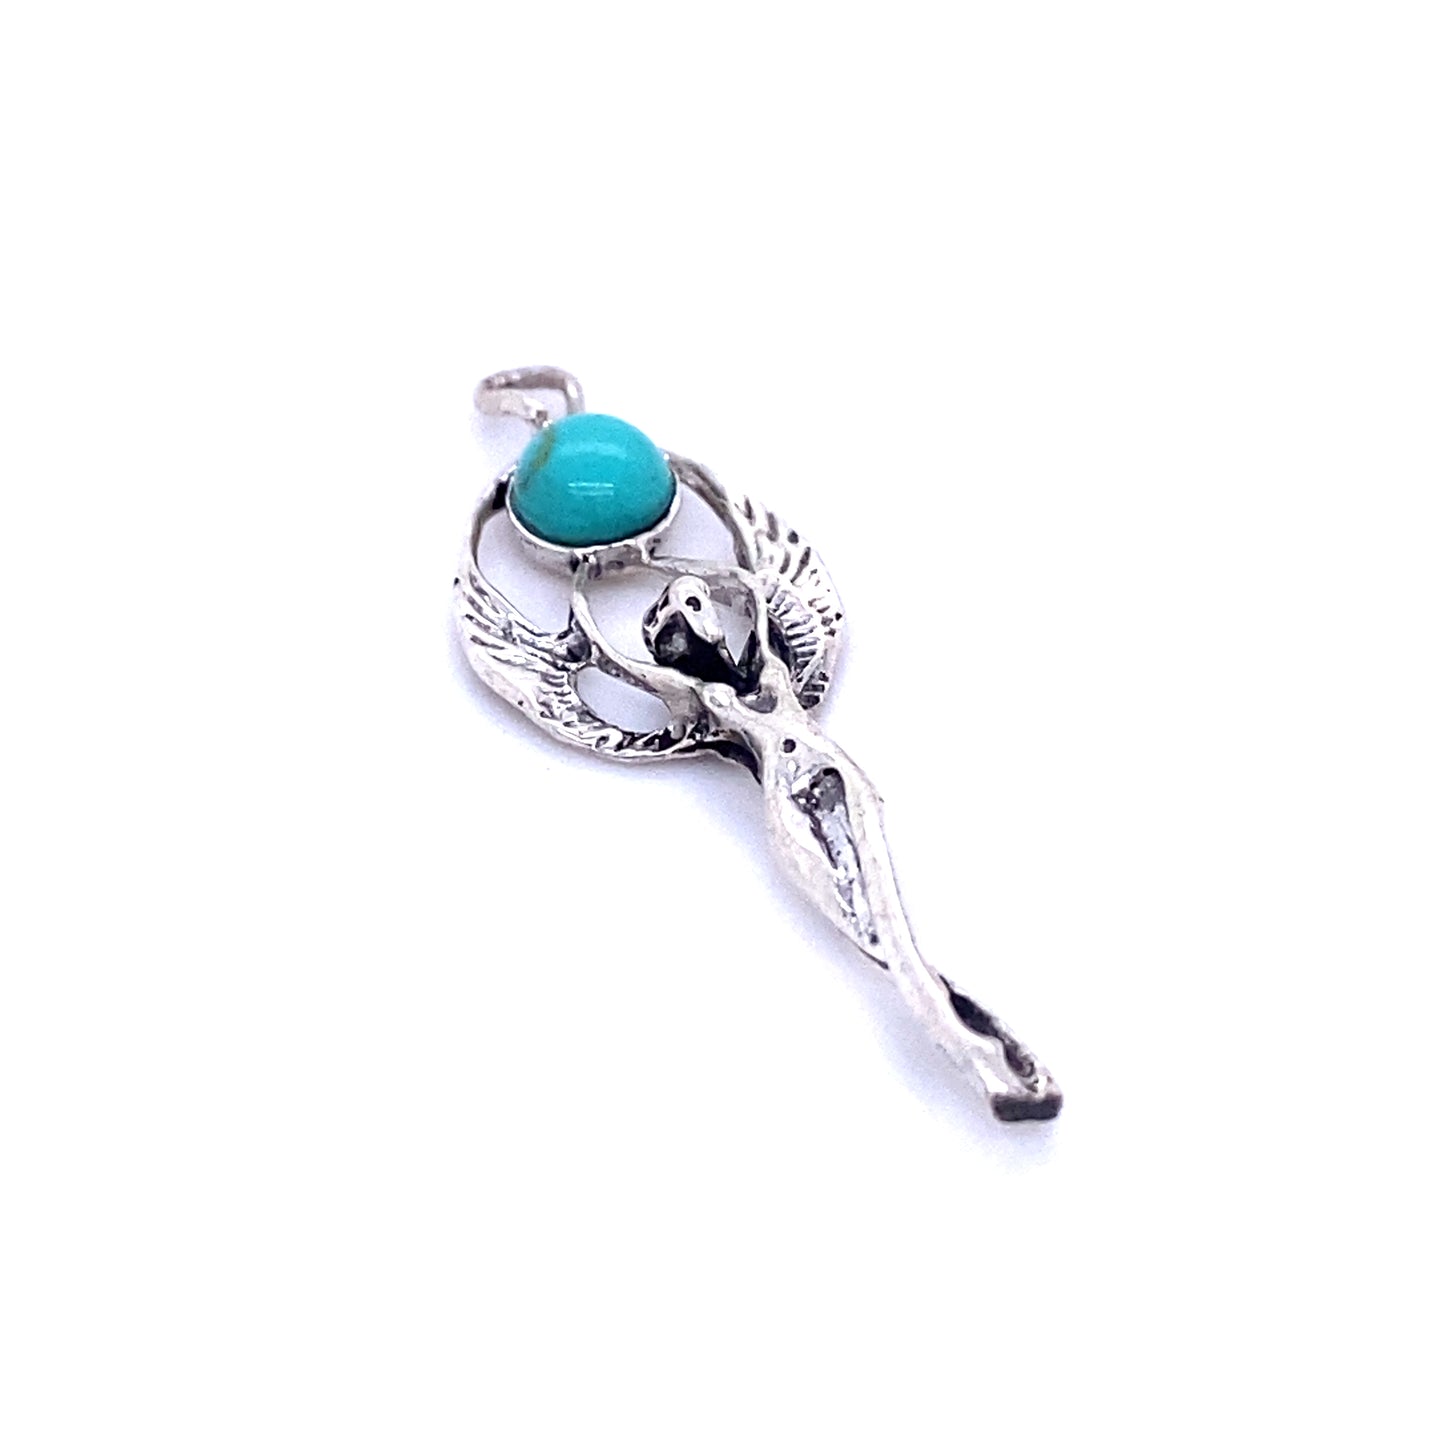 A Fairy Angel Turquoise Pendant by Super Silver featuring a winged maiden.